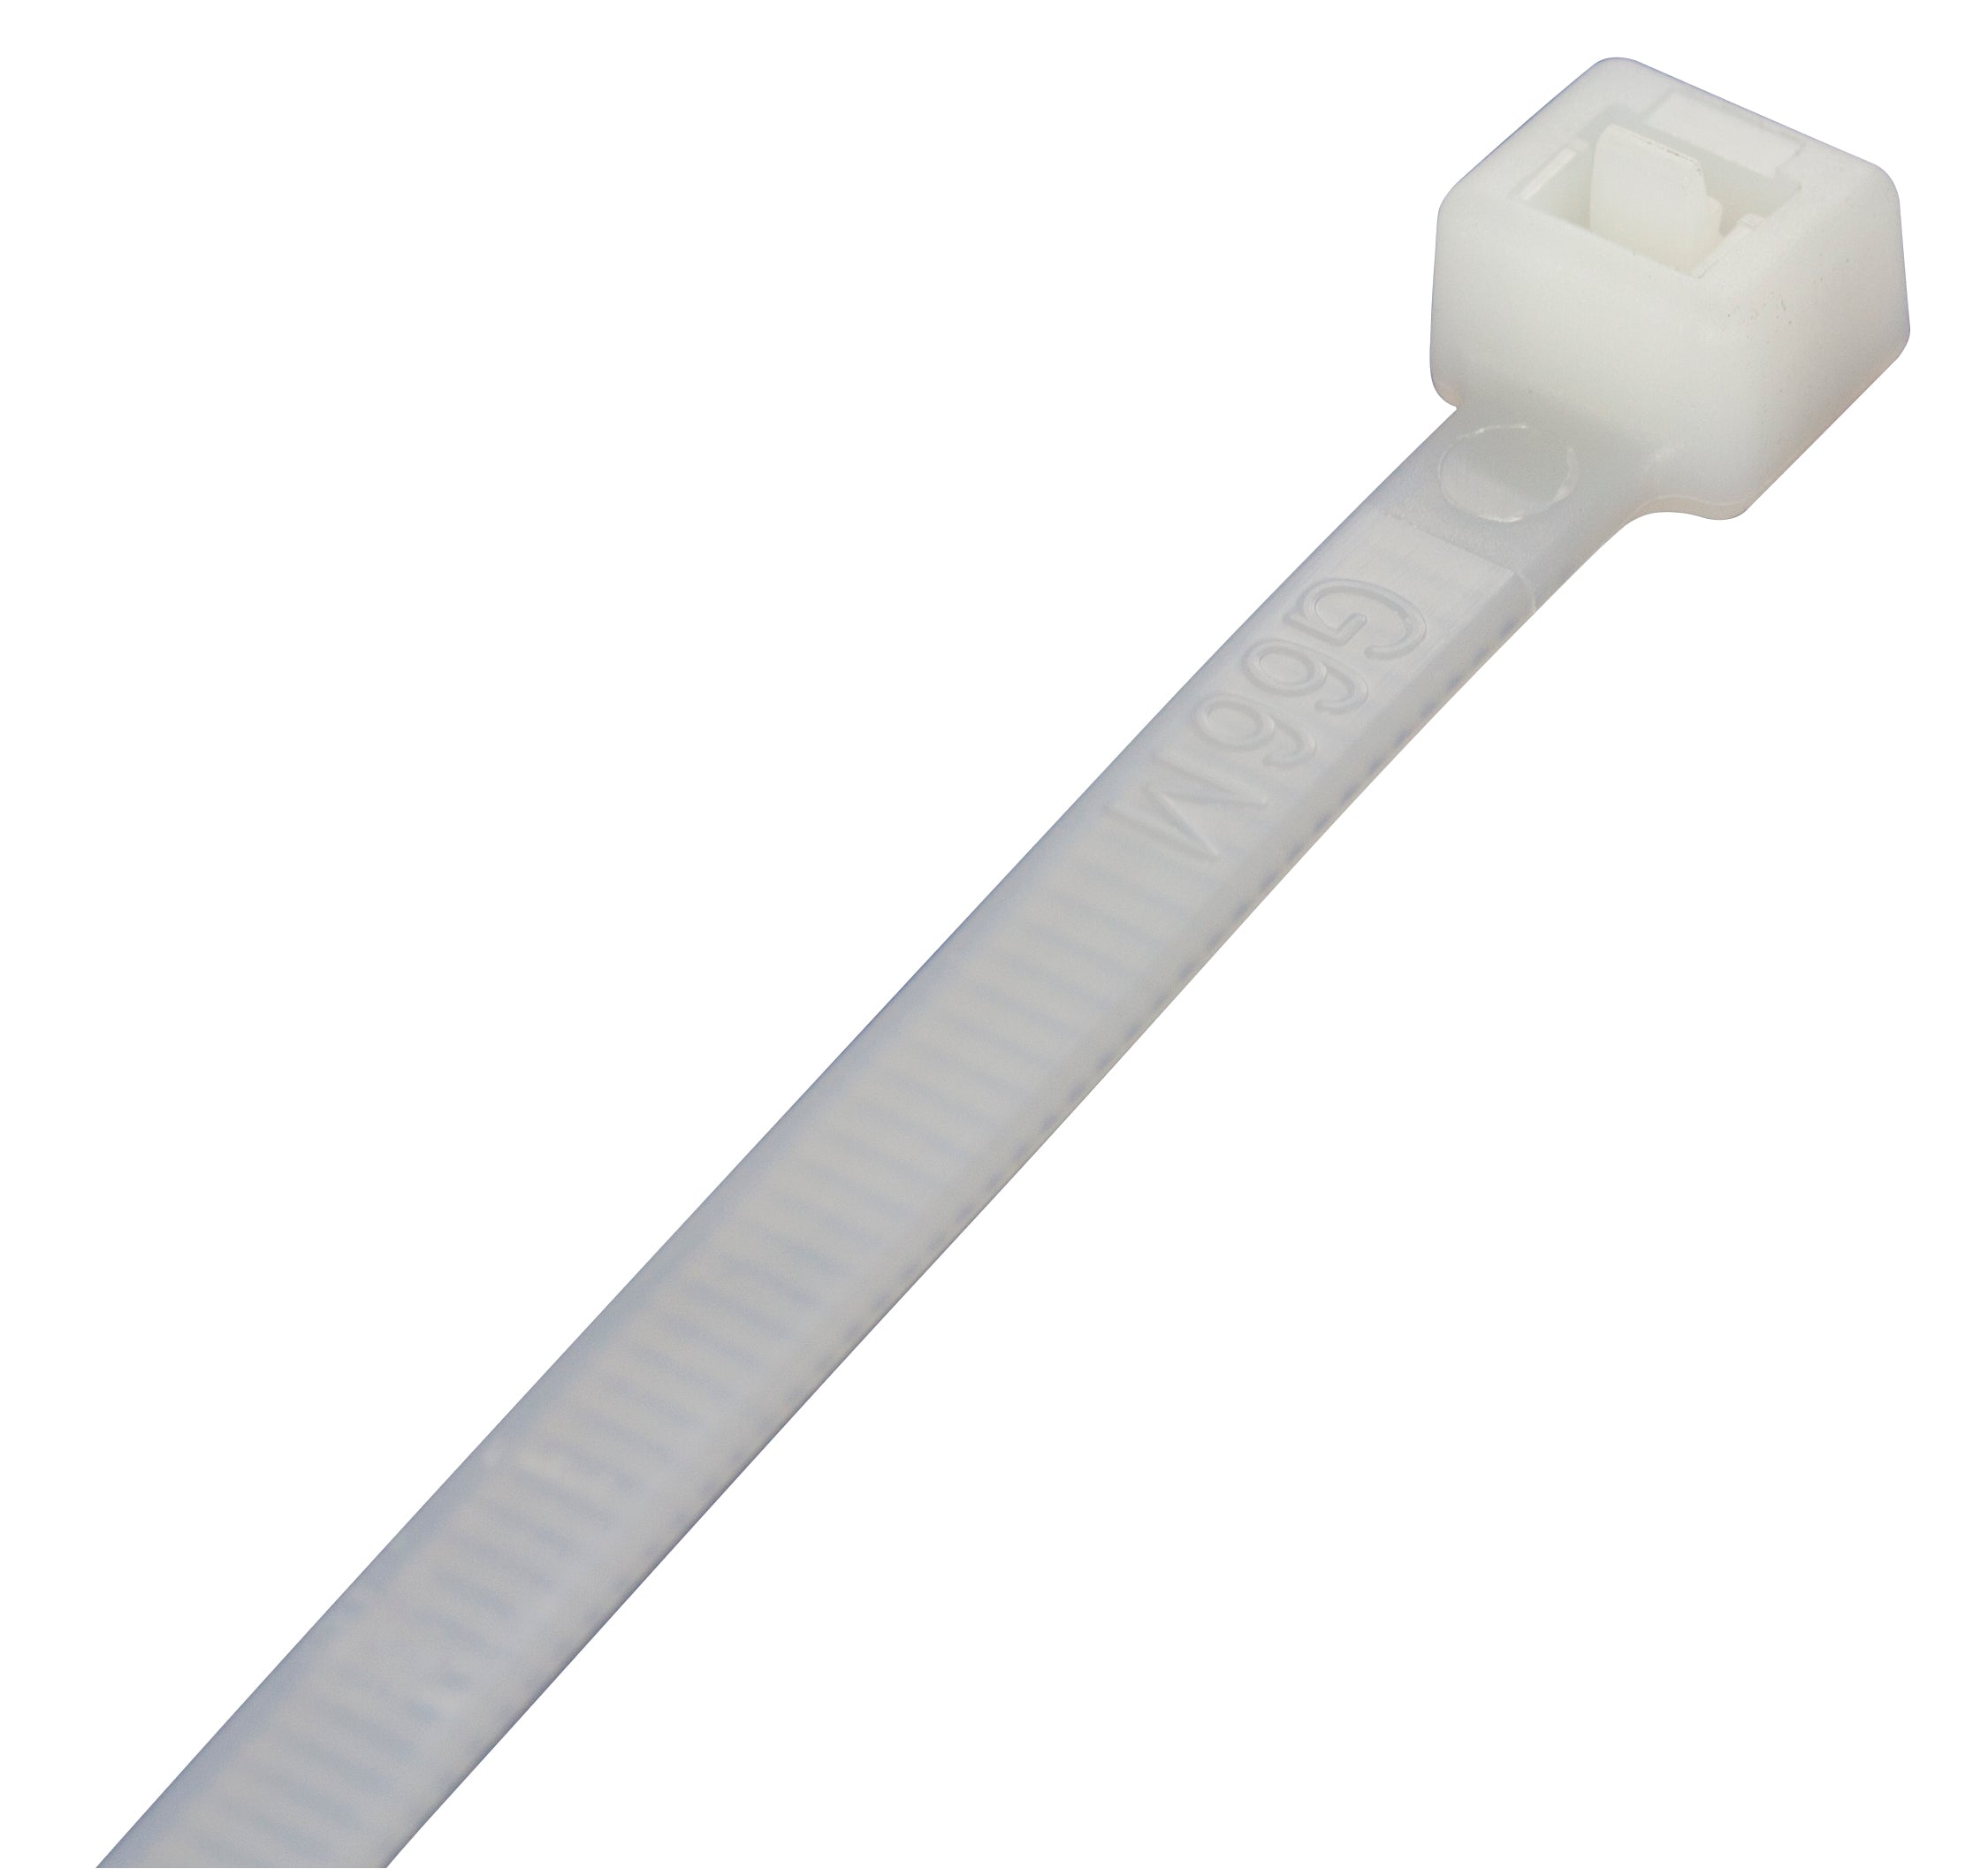 Premium Natural Cable Ties 300mm x 7.6mm - Pack of 100